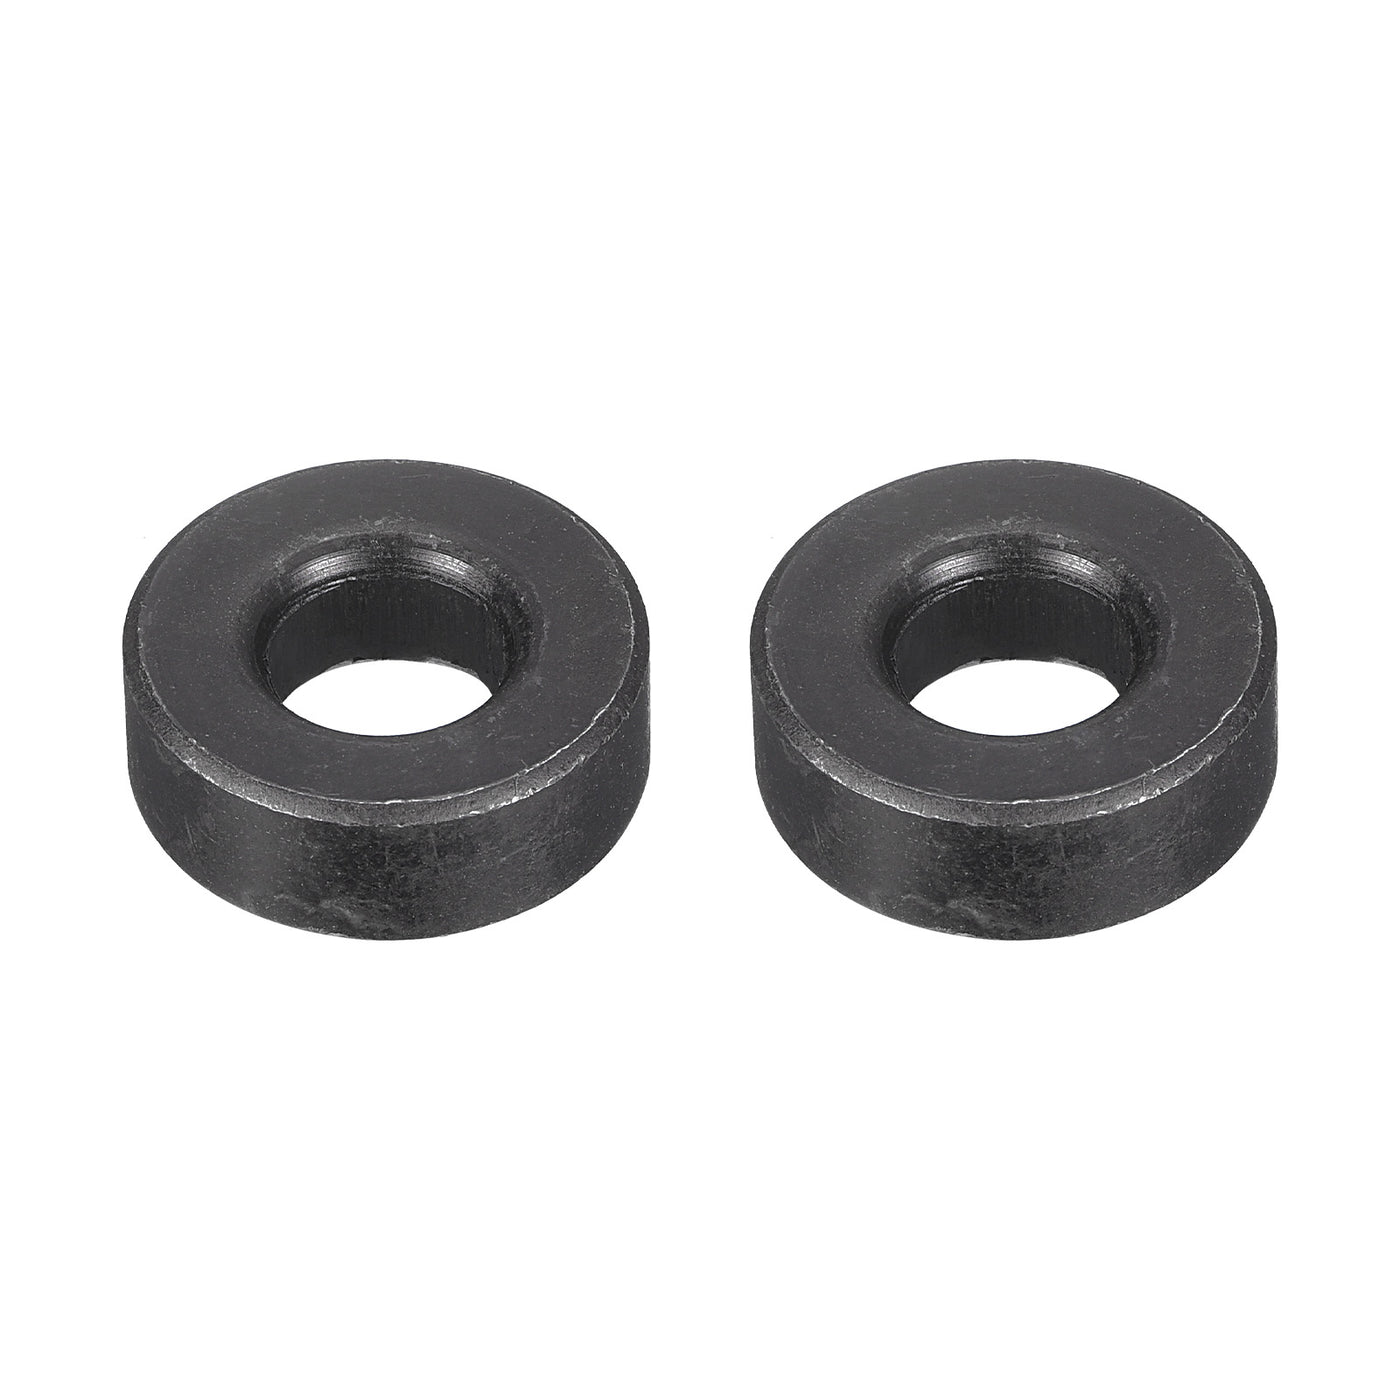 uxcell Uxcell M12 Carbon Steel Flat Washer 2pcs 13x28x10mm Grade 8.8 Alloy Steel Fasteners